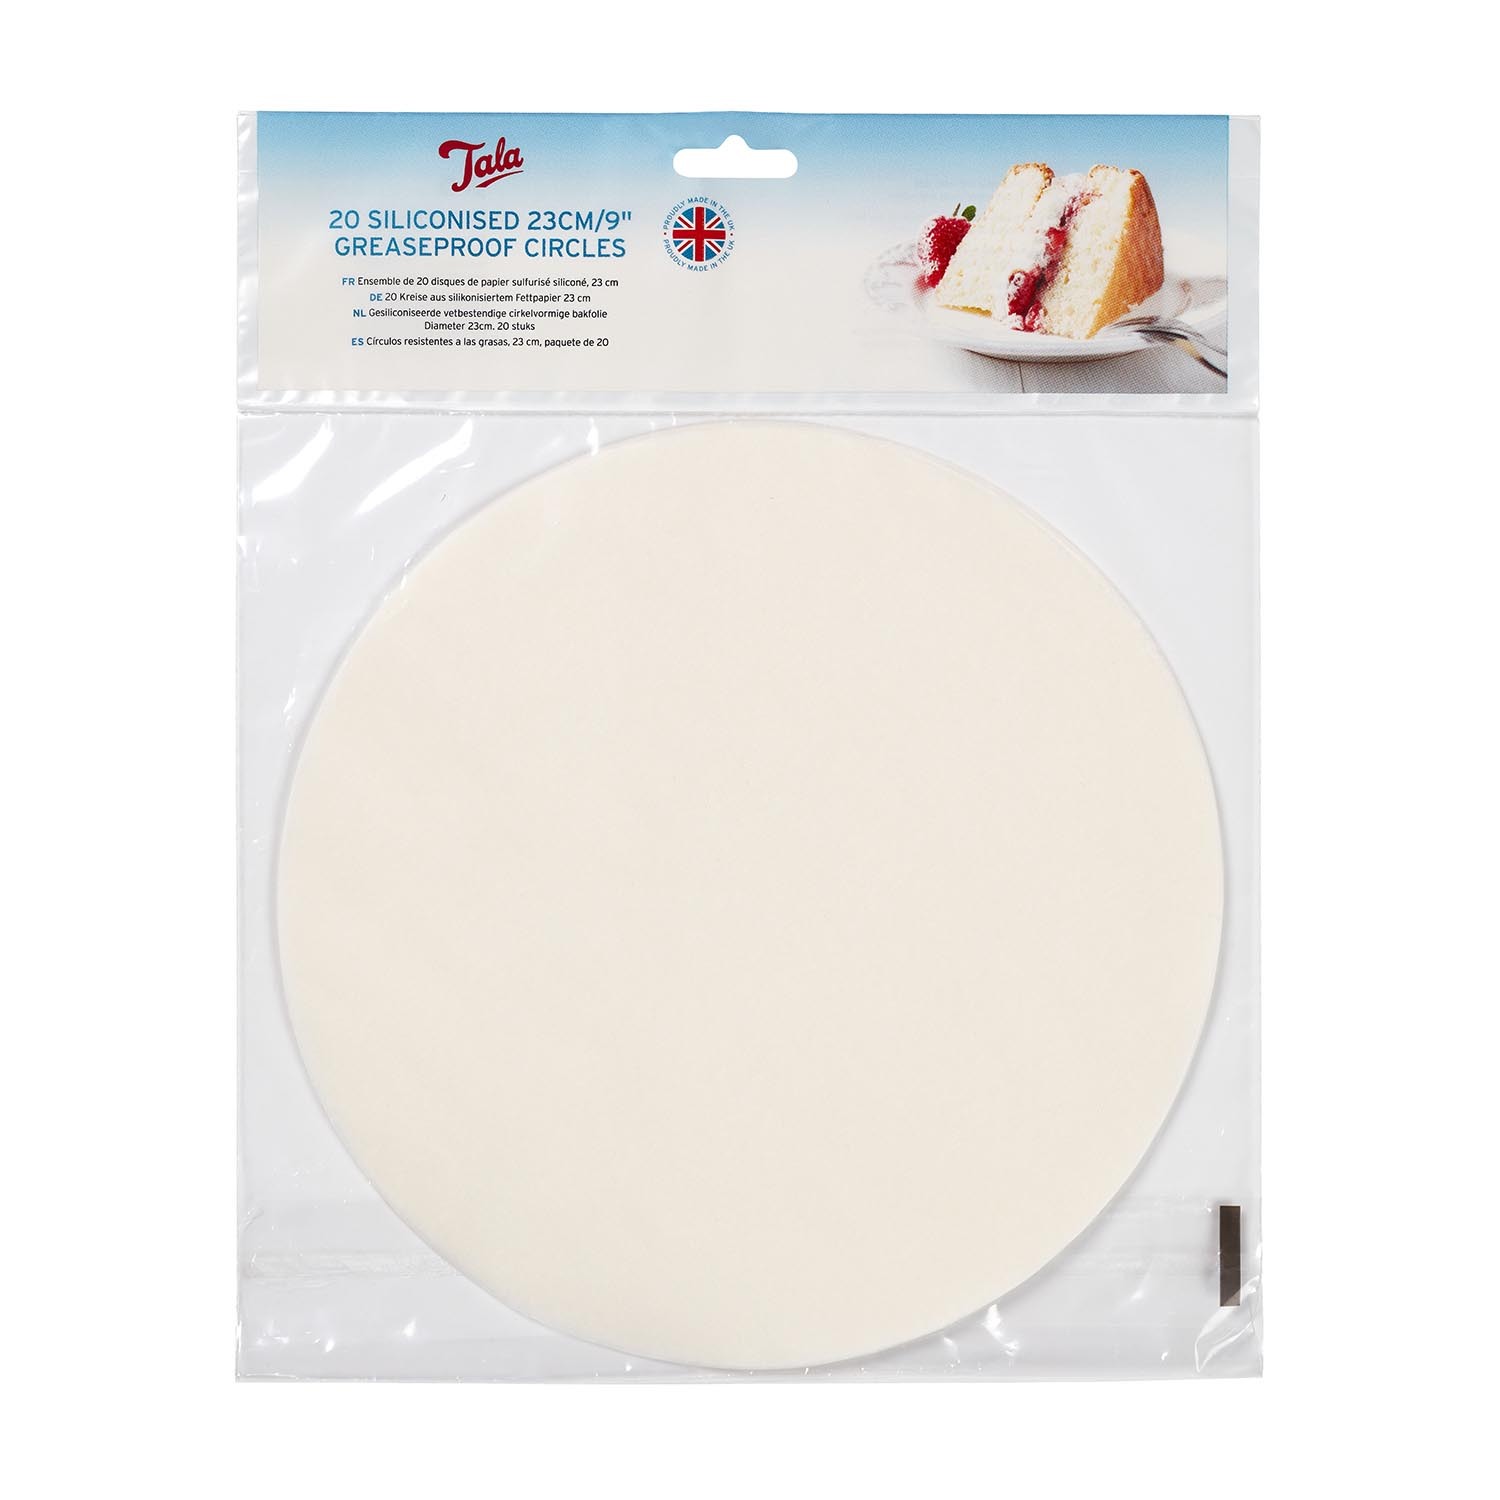 Pack of 20 Tala Siliconised Greaseproof Circles - White Image